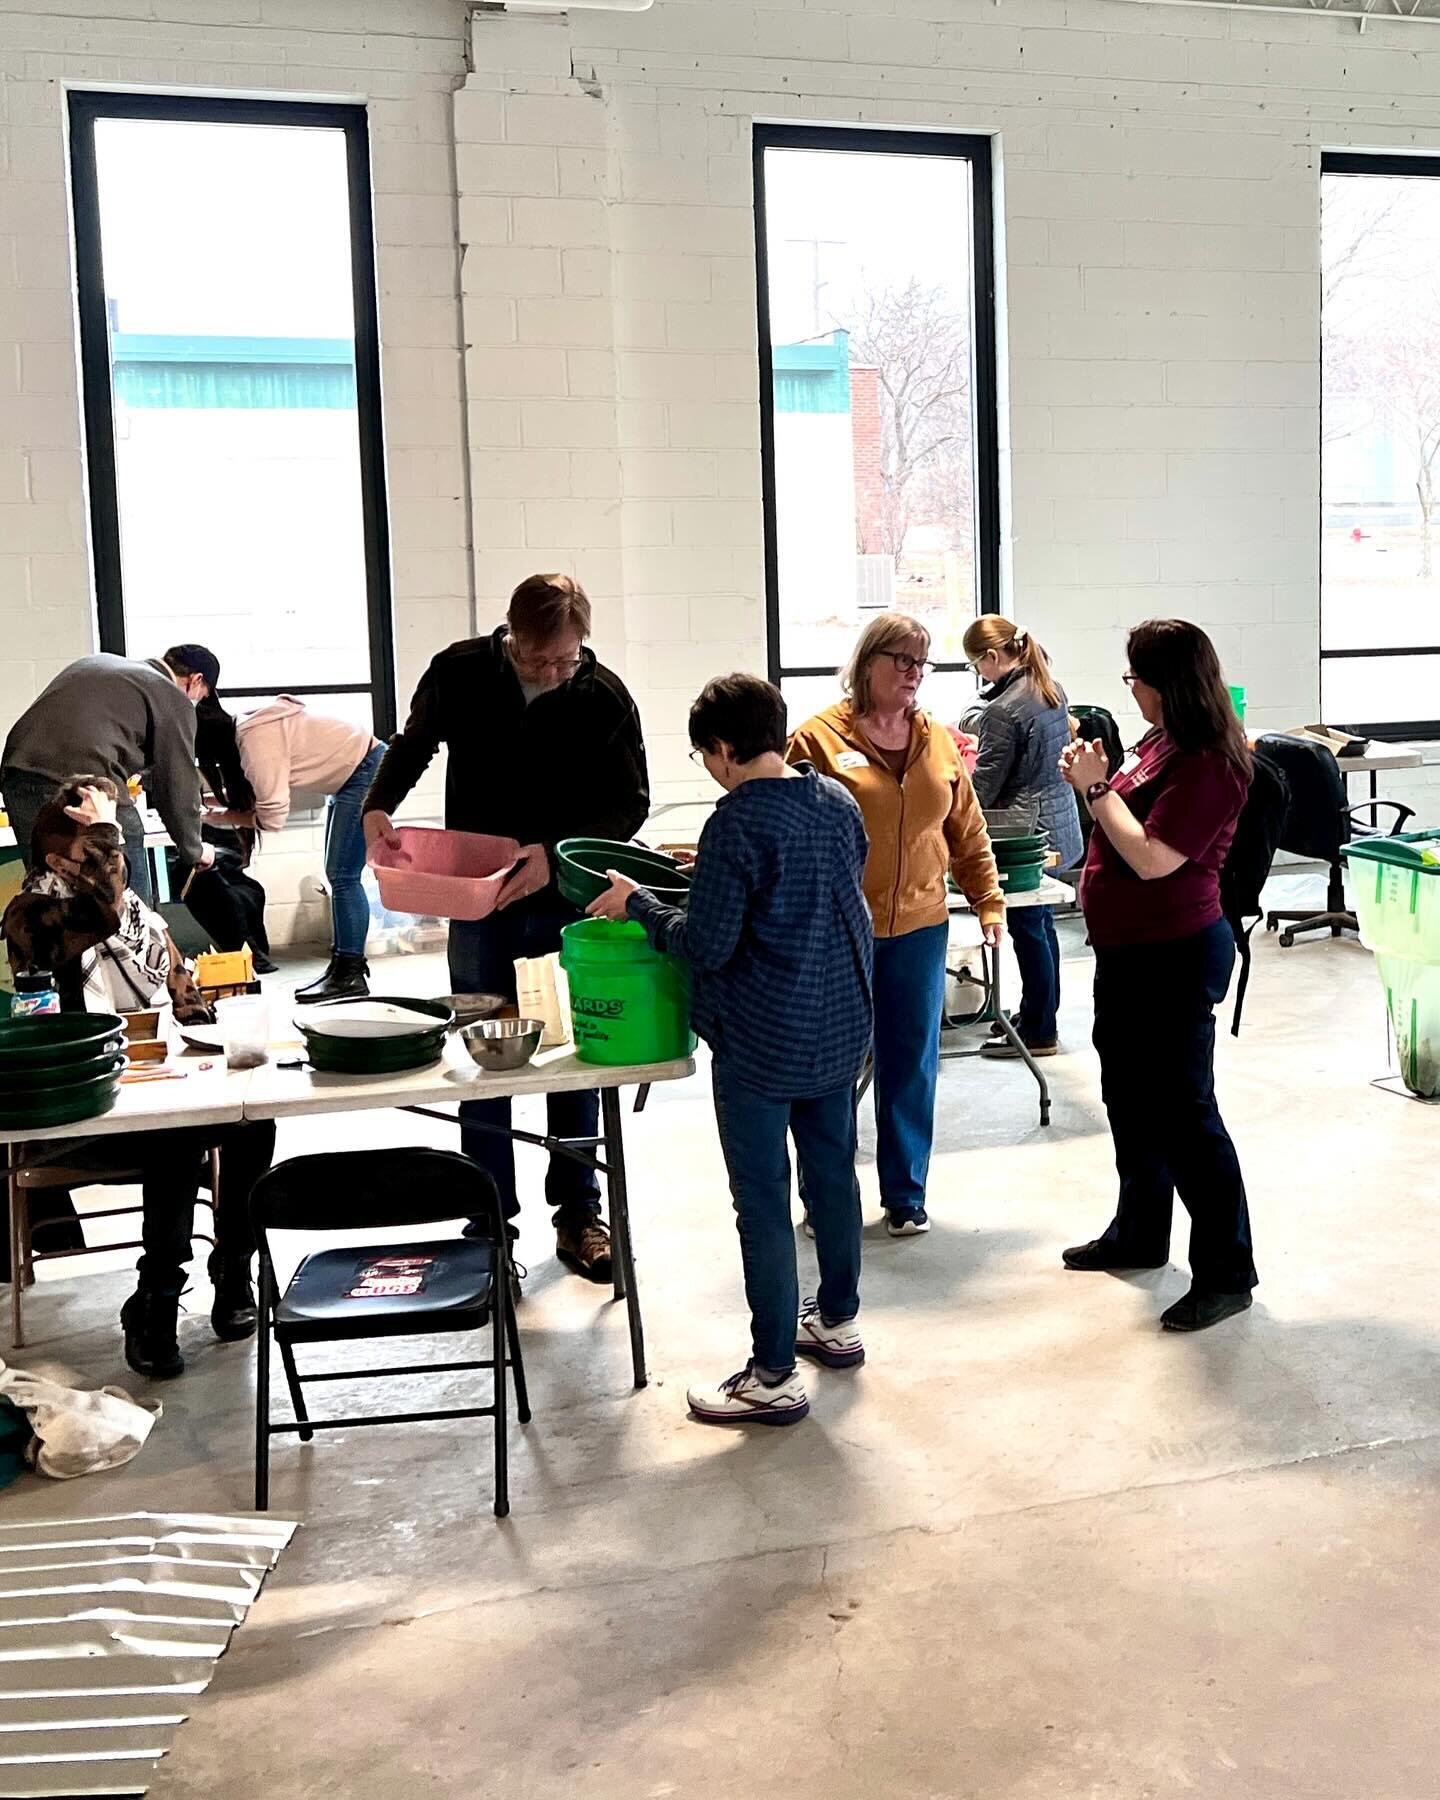 Earlier in February, 25 industrious @greatrivergreening  volunteers participated in cleaning and processing seeds of 83 different native pollinator species with @mn_seed_project .  During 2 sessions, volunteers helped further a valuable local communi